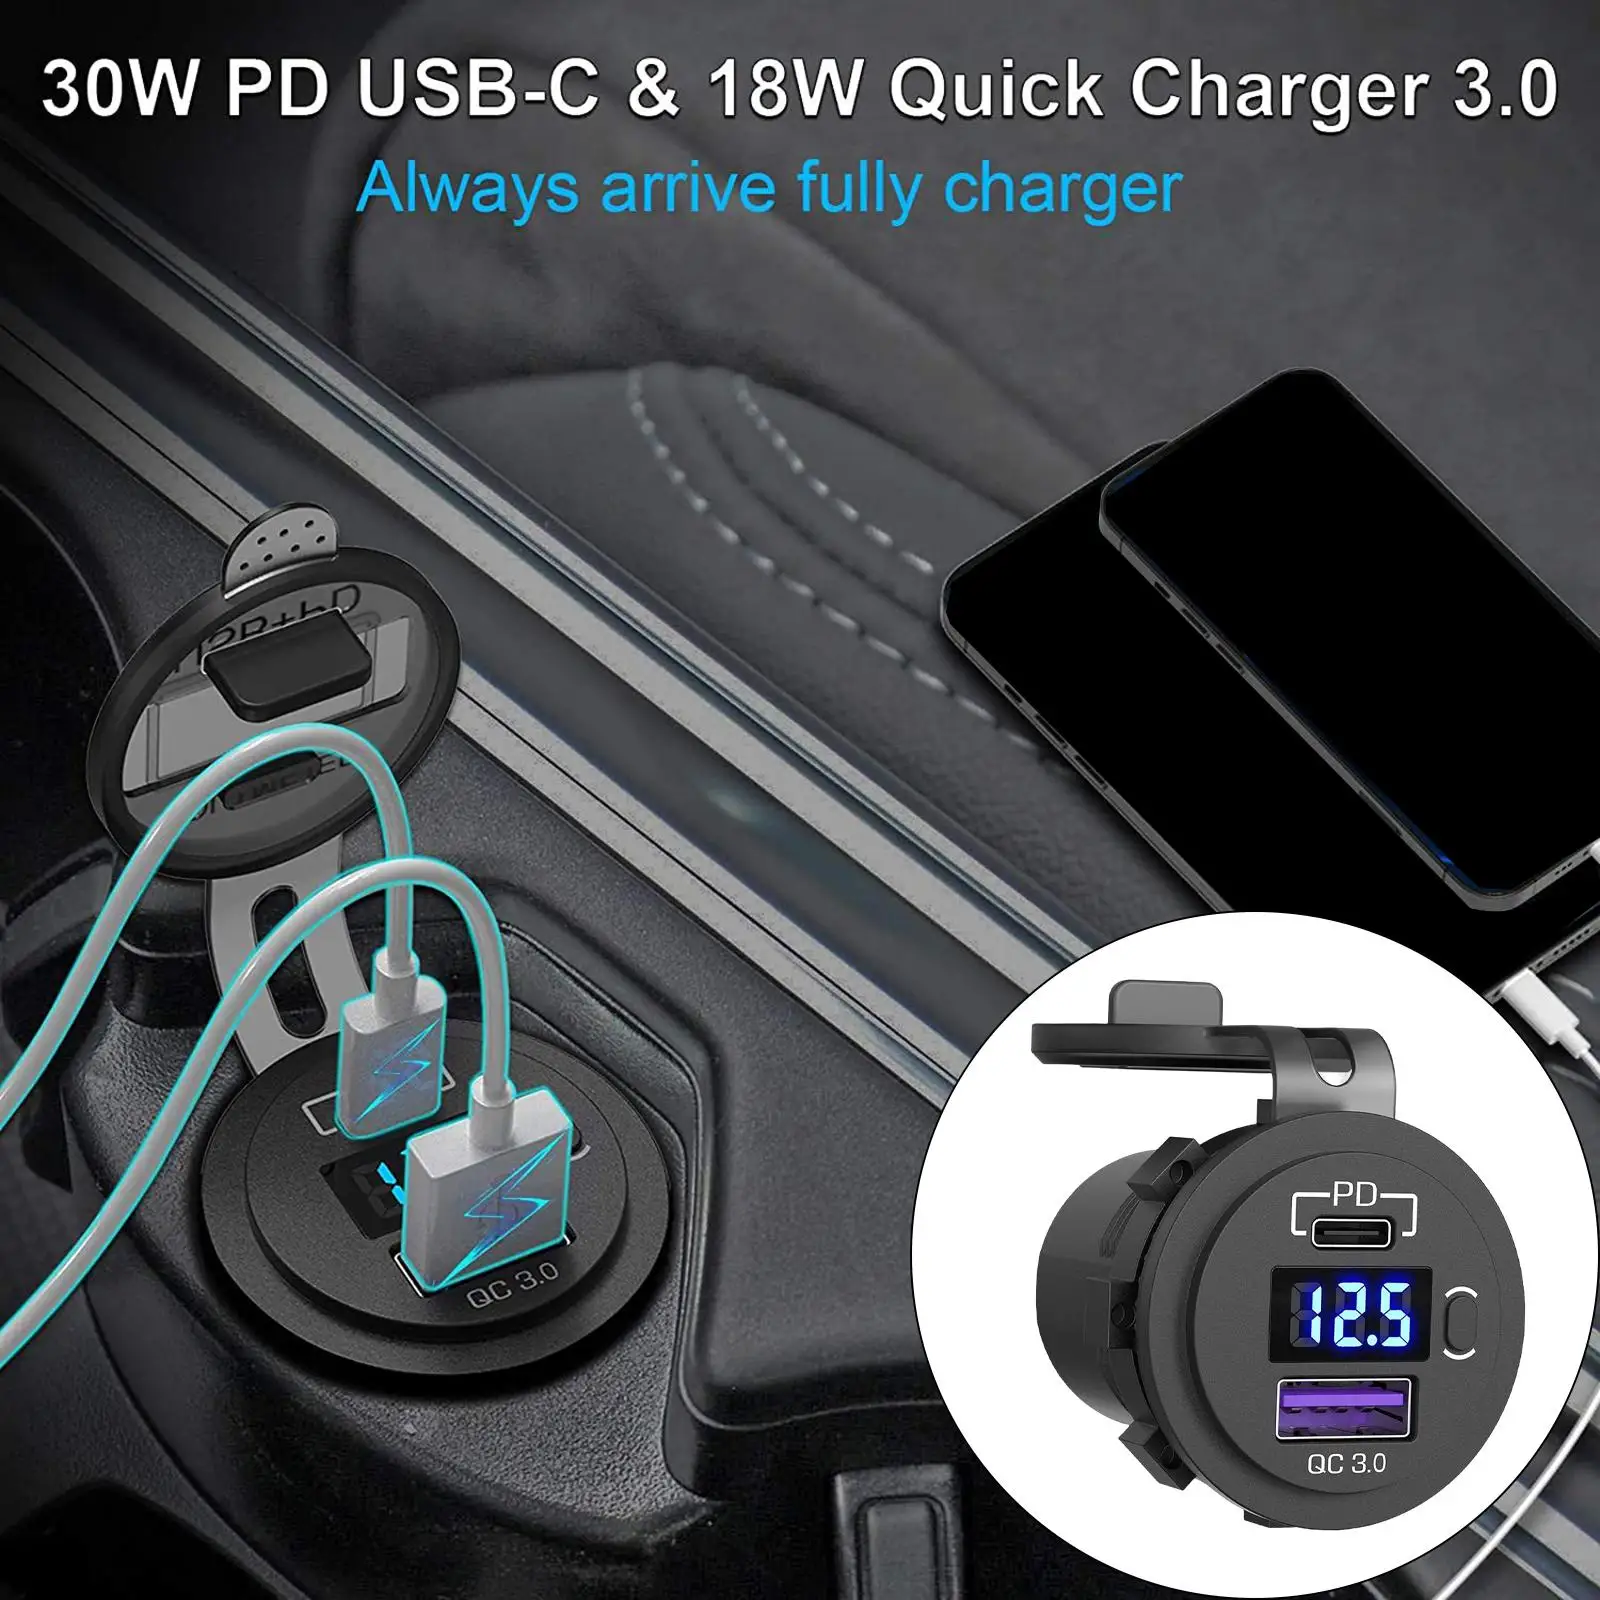 USB C Car Charger 33W PD & QC3.0 12V/24V 10A Fuse SUV RV Van Truck Power Outlet Quick Charge Phone Charger with Voltage Display